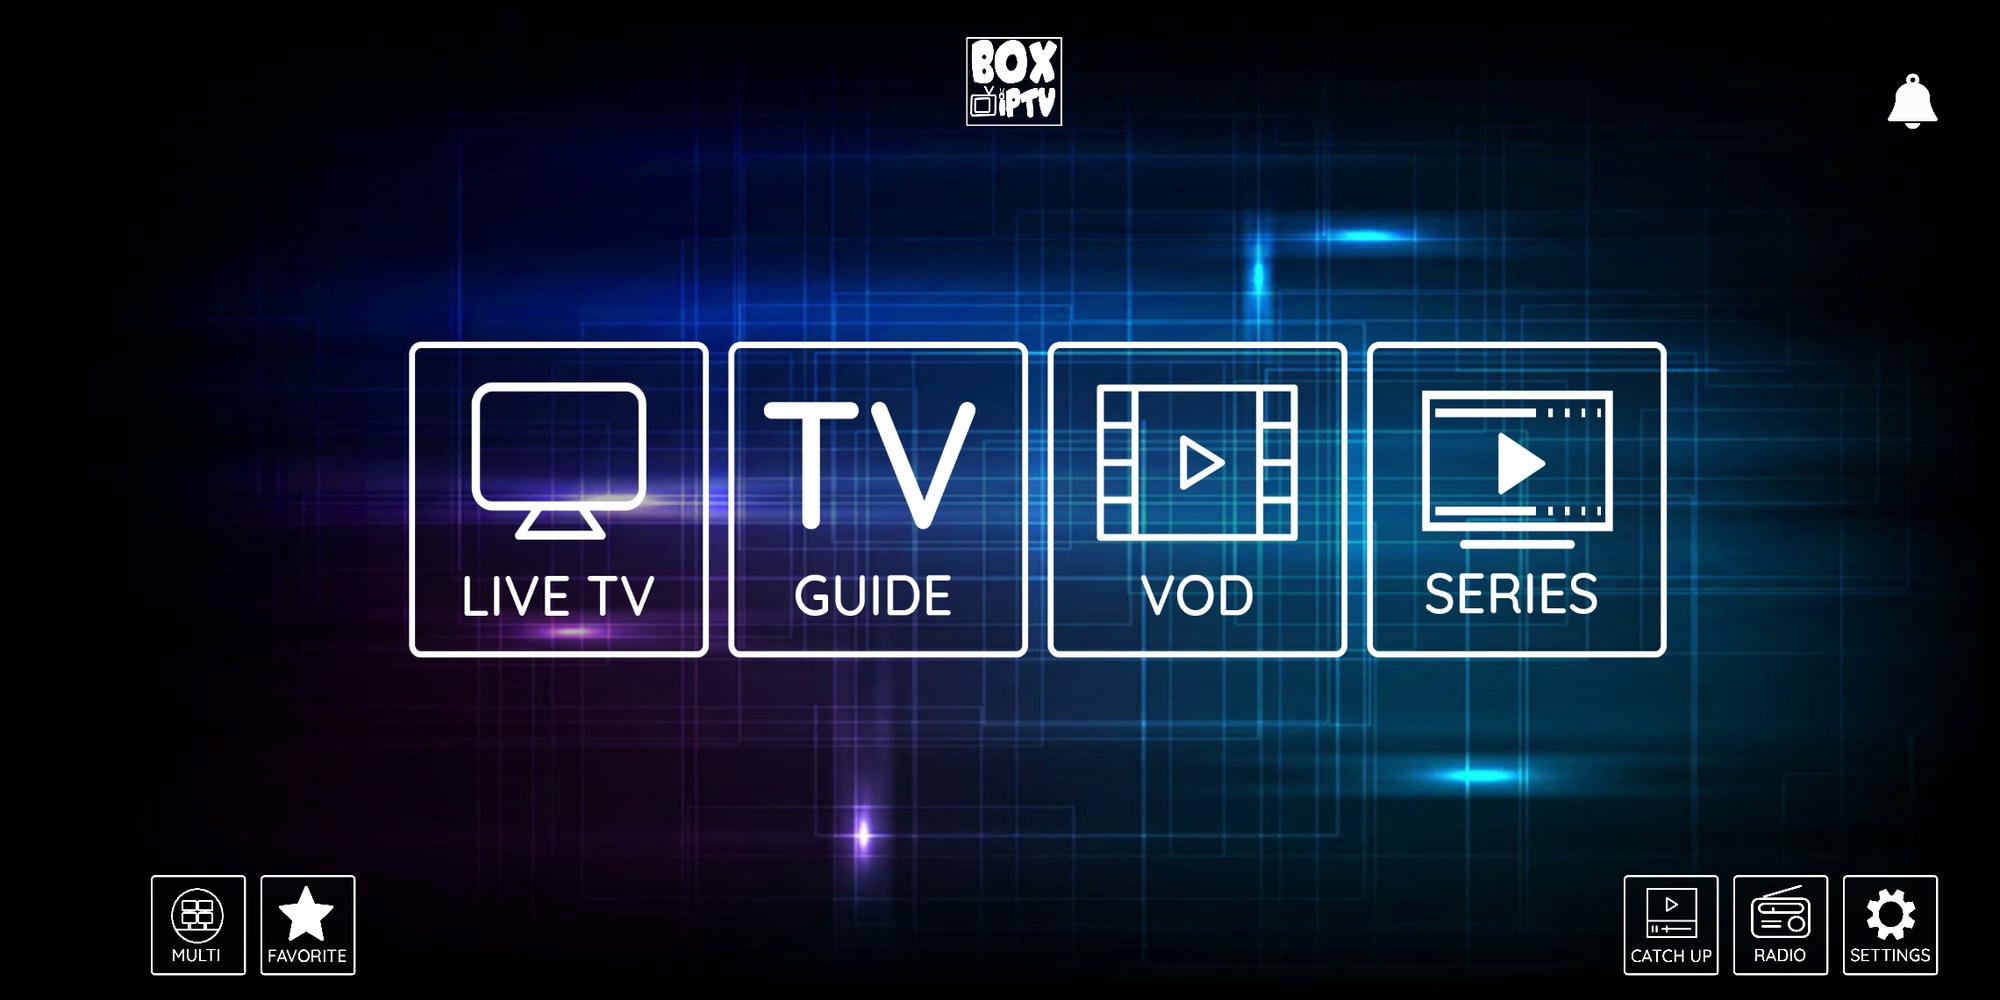 BOX IPTV for Android - APK Download